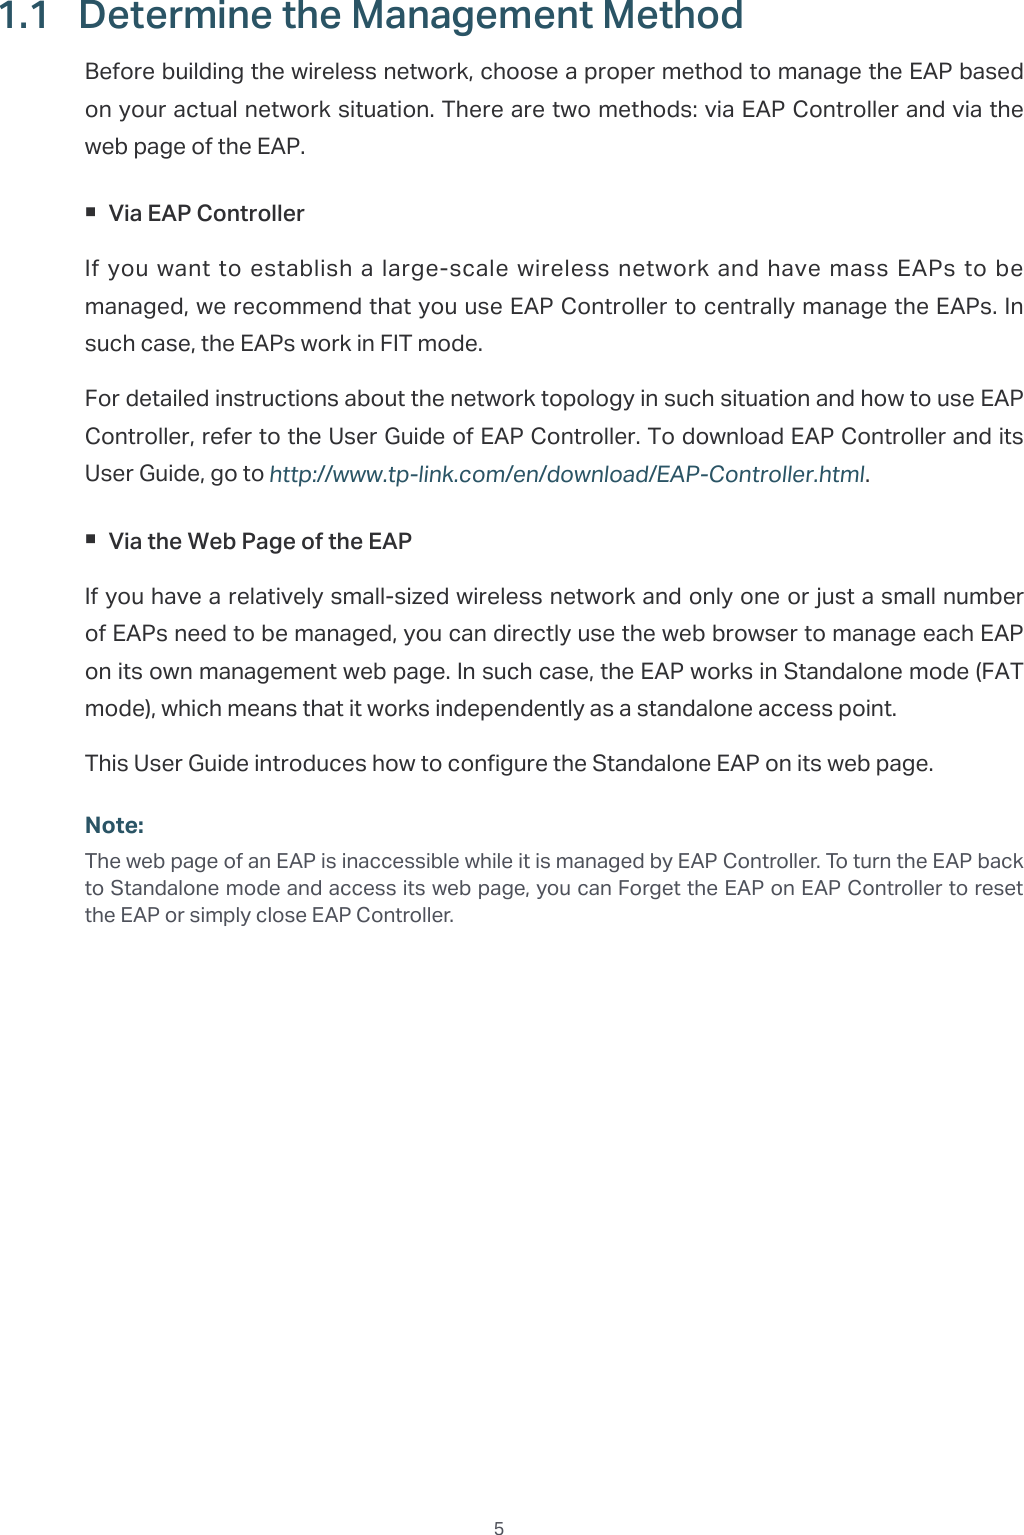  51.1  Determine the Management MethodBefore building the wireless network, choose a proper method to manage the EAP based on your actual network situation. There are two methods: via EAP Controller and via the web page of the EAP. Via EAP ControllerIf you want to establish a large-scale wireless network and have mass EAPs to be managed, we recommend that you use EAP Controller to centrally manage the EAPs. In such case, the EAPs work in FIT mode.For detailed instructions about the network topology in such situation and how to use EAP Controller, refer to the User Guide of EAP Controller. To download EAP Controller and its User Guide, go to http://www.tp-link.com/en/download/EAP-Controller.html. Via the Web Page of the EAPIf you have a relatively small-sized wireless network and only one or just a small number of EAPs need to be managed, you can directly use the web browser to manage each EAP on its own management web page. In such case, the EAP works in Standalone mode (FAT mode), which means that it works independently as a standalone access point.This User Guide introduces how to configure the Standalone EAP on its web page.Note:The web page of an EAP is inaccessible while it is managed by EAP Controller. To turn the EAP back to Standalone mode and access its web page, you can Forget the EAP on EAP Controller to reset the EAP or simply close EAP Controller.